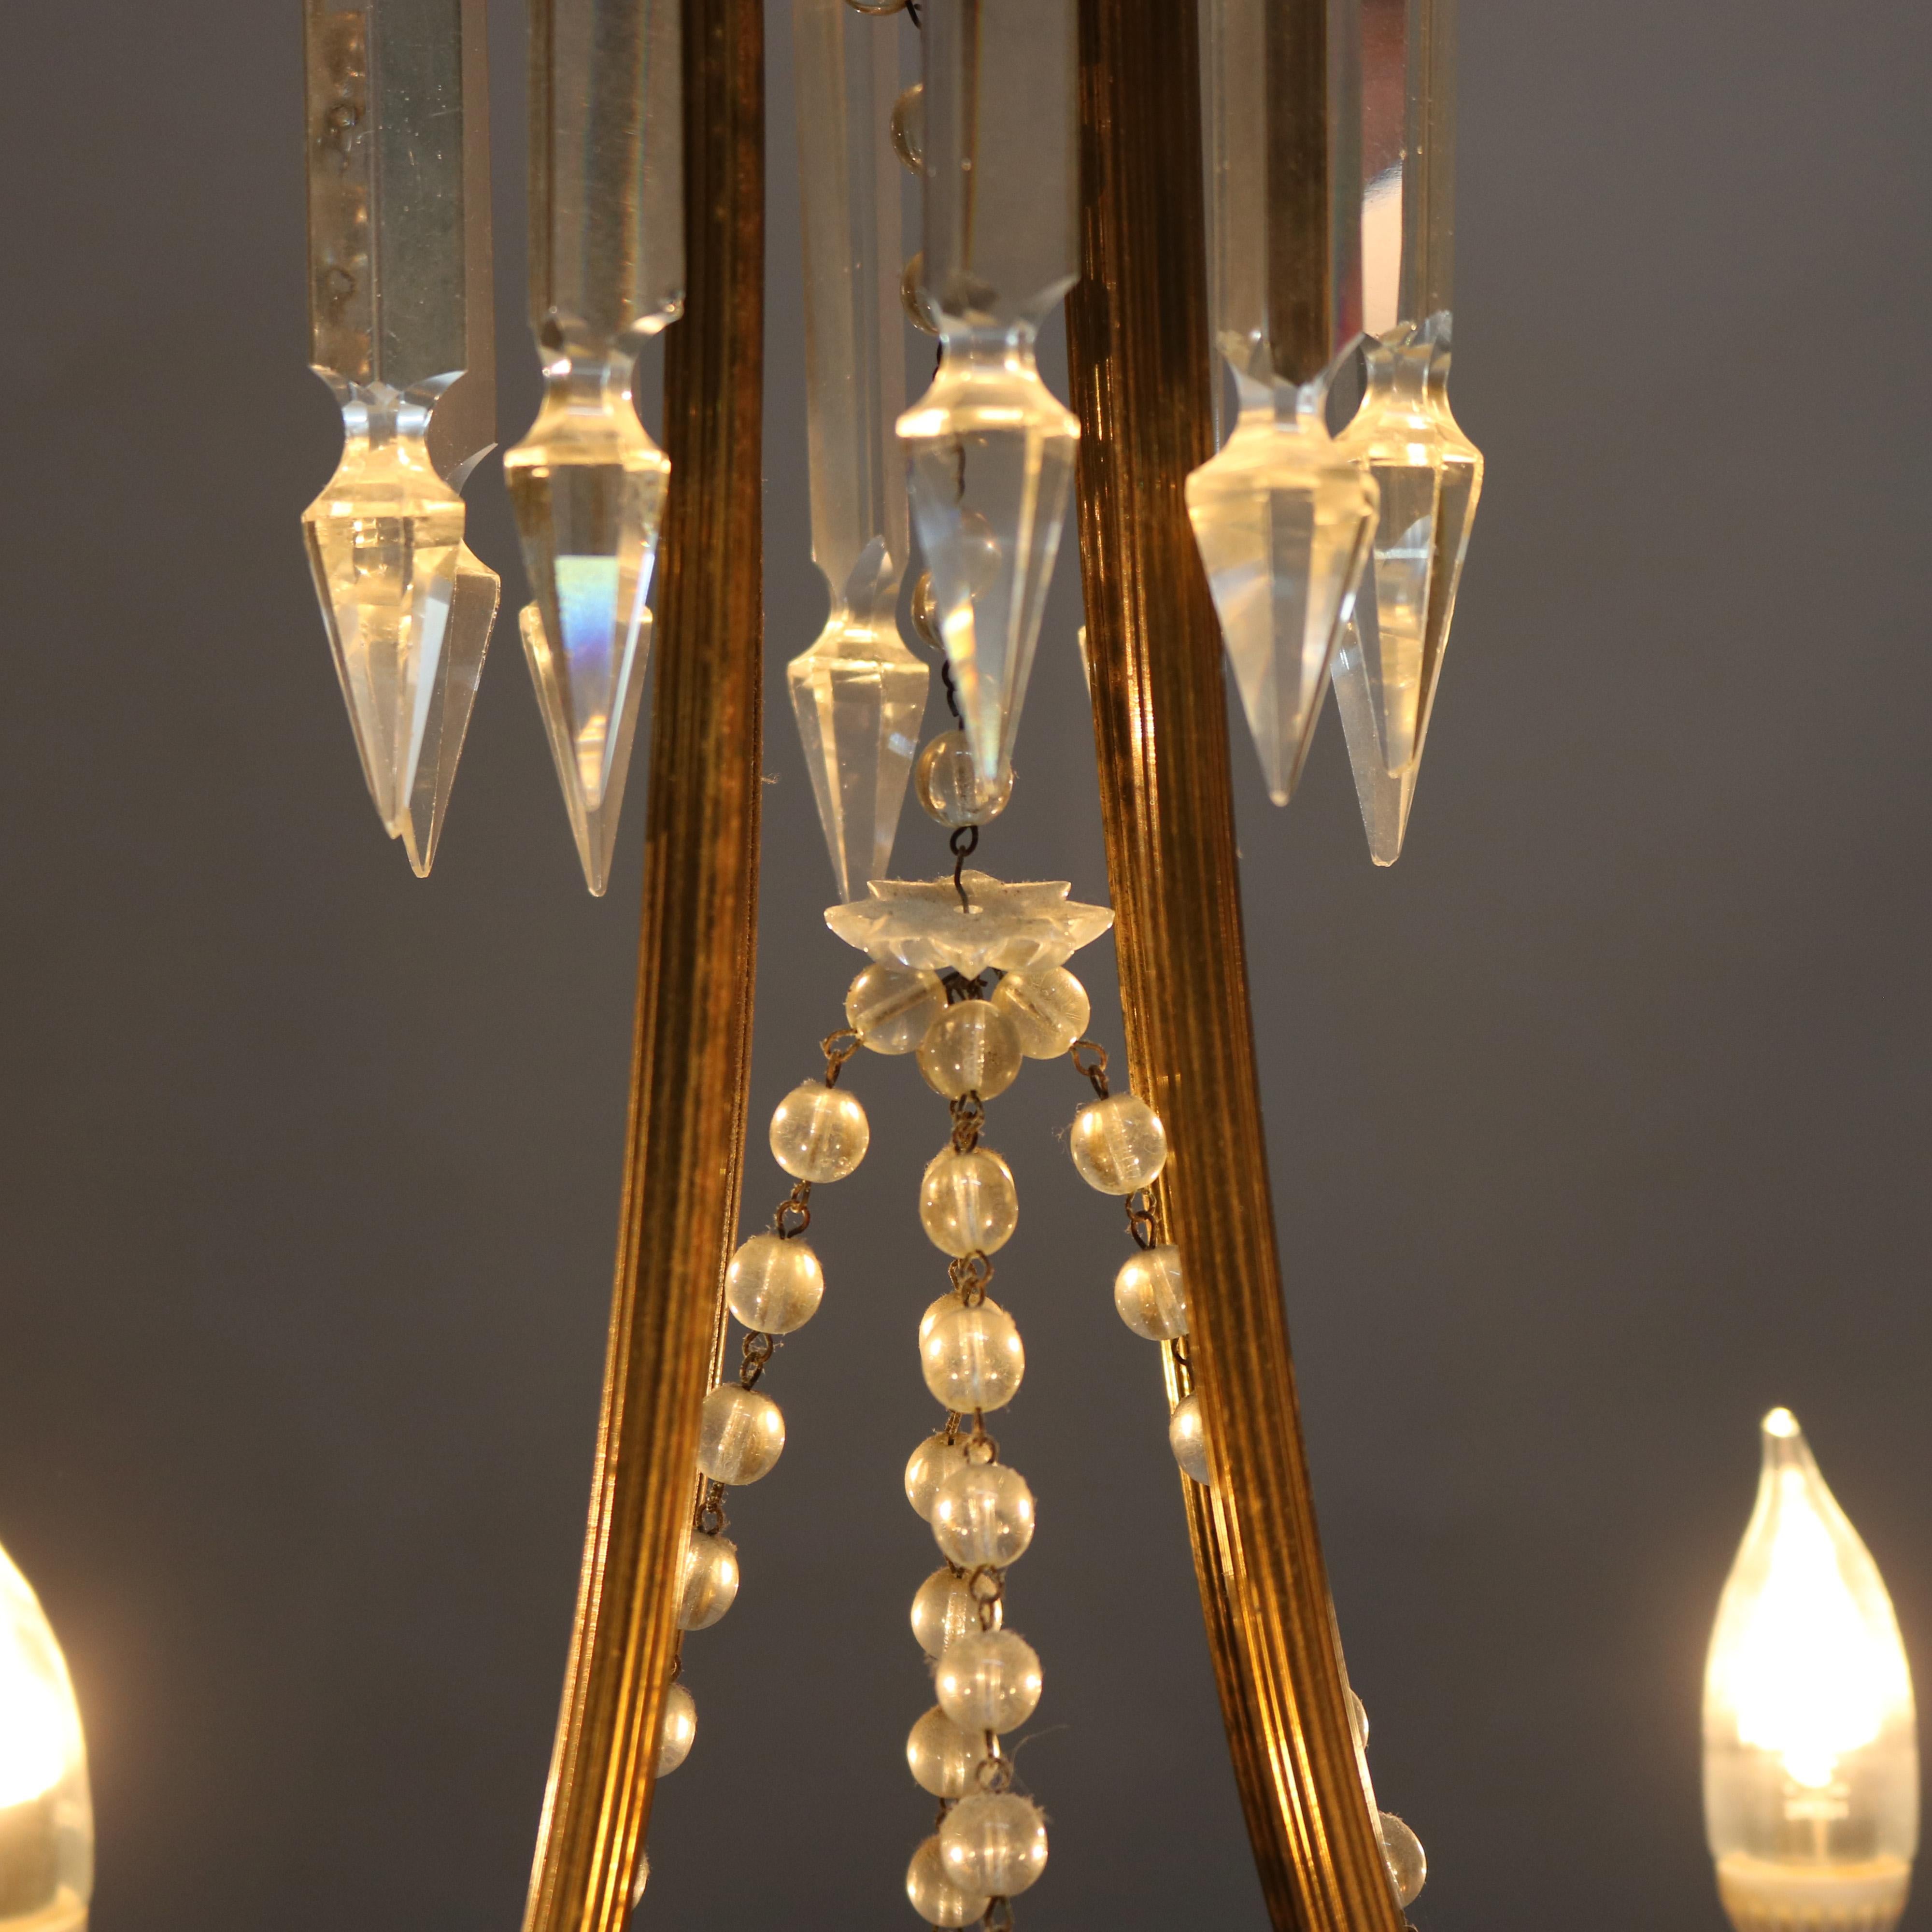 20th Century Antique French Style Bronzed Four-Light Chandelier with Draped Crystals, c1920 For Sale